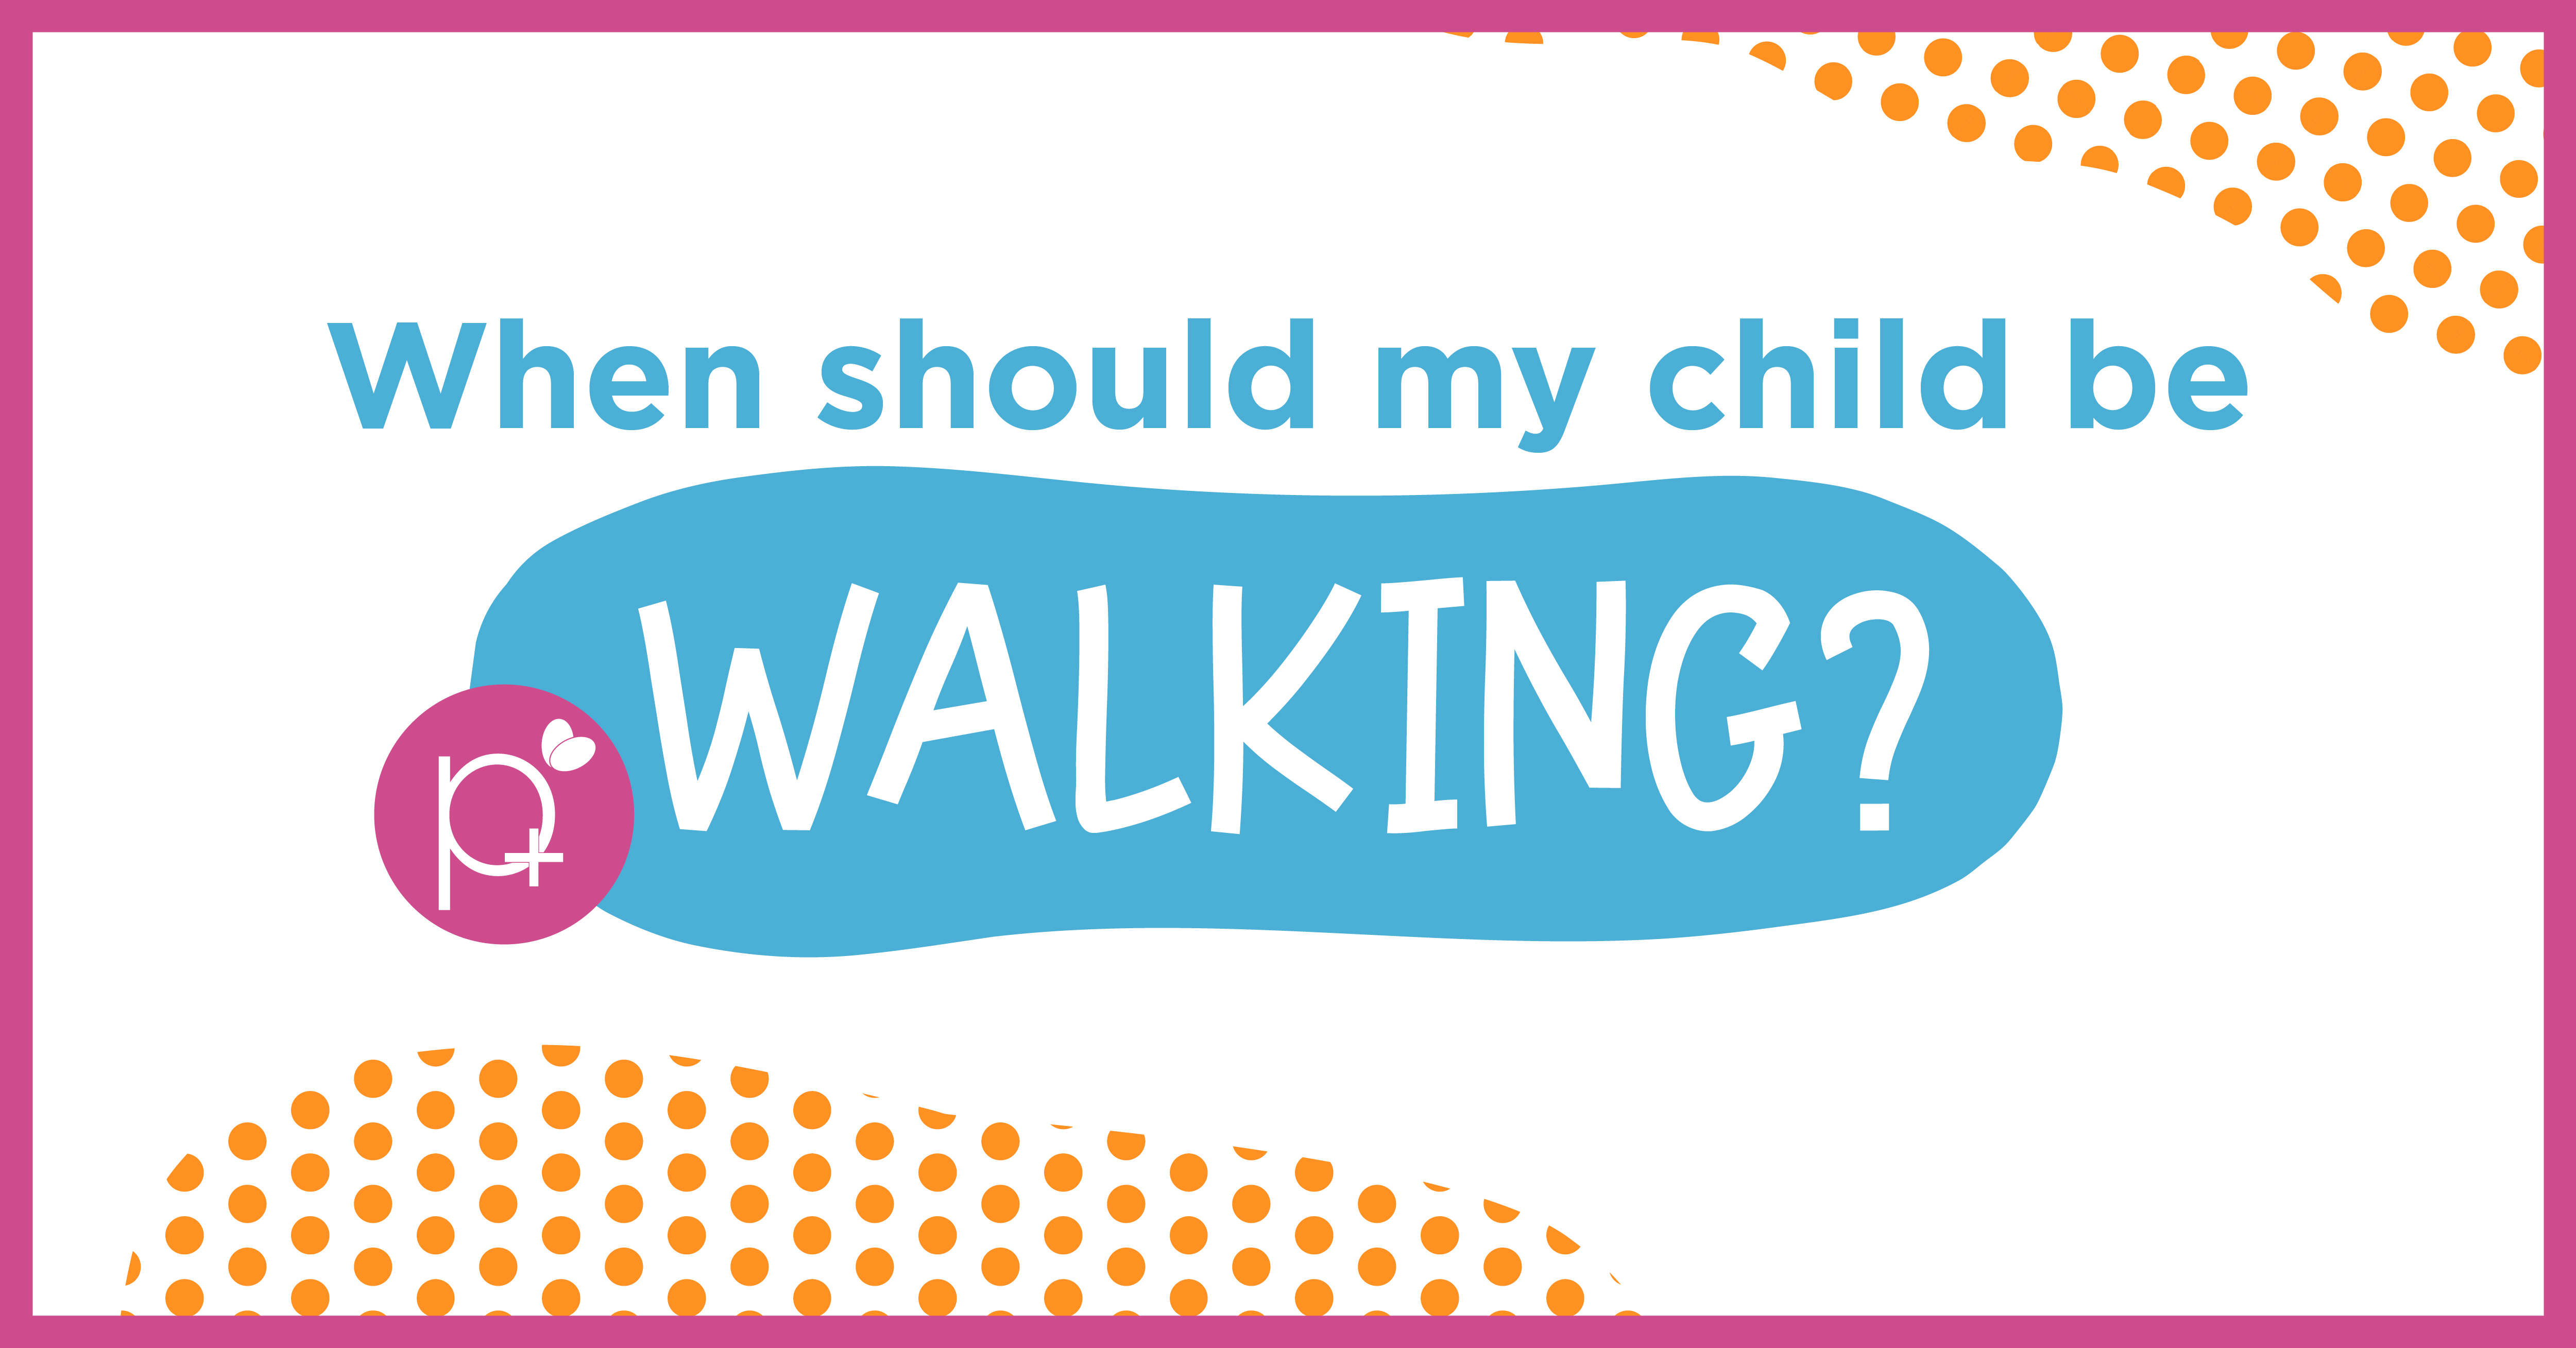 When should my child be walking?